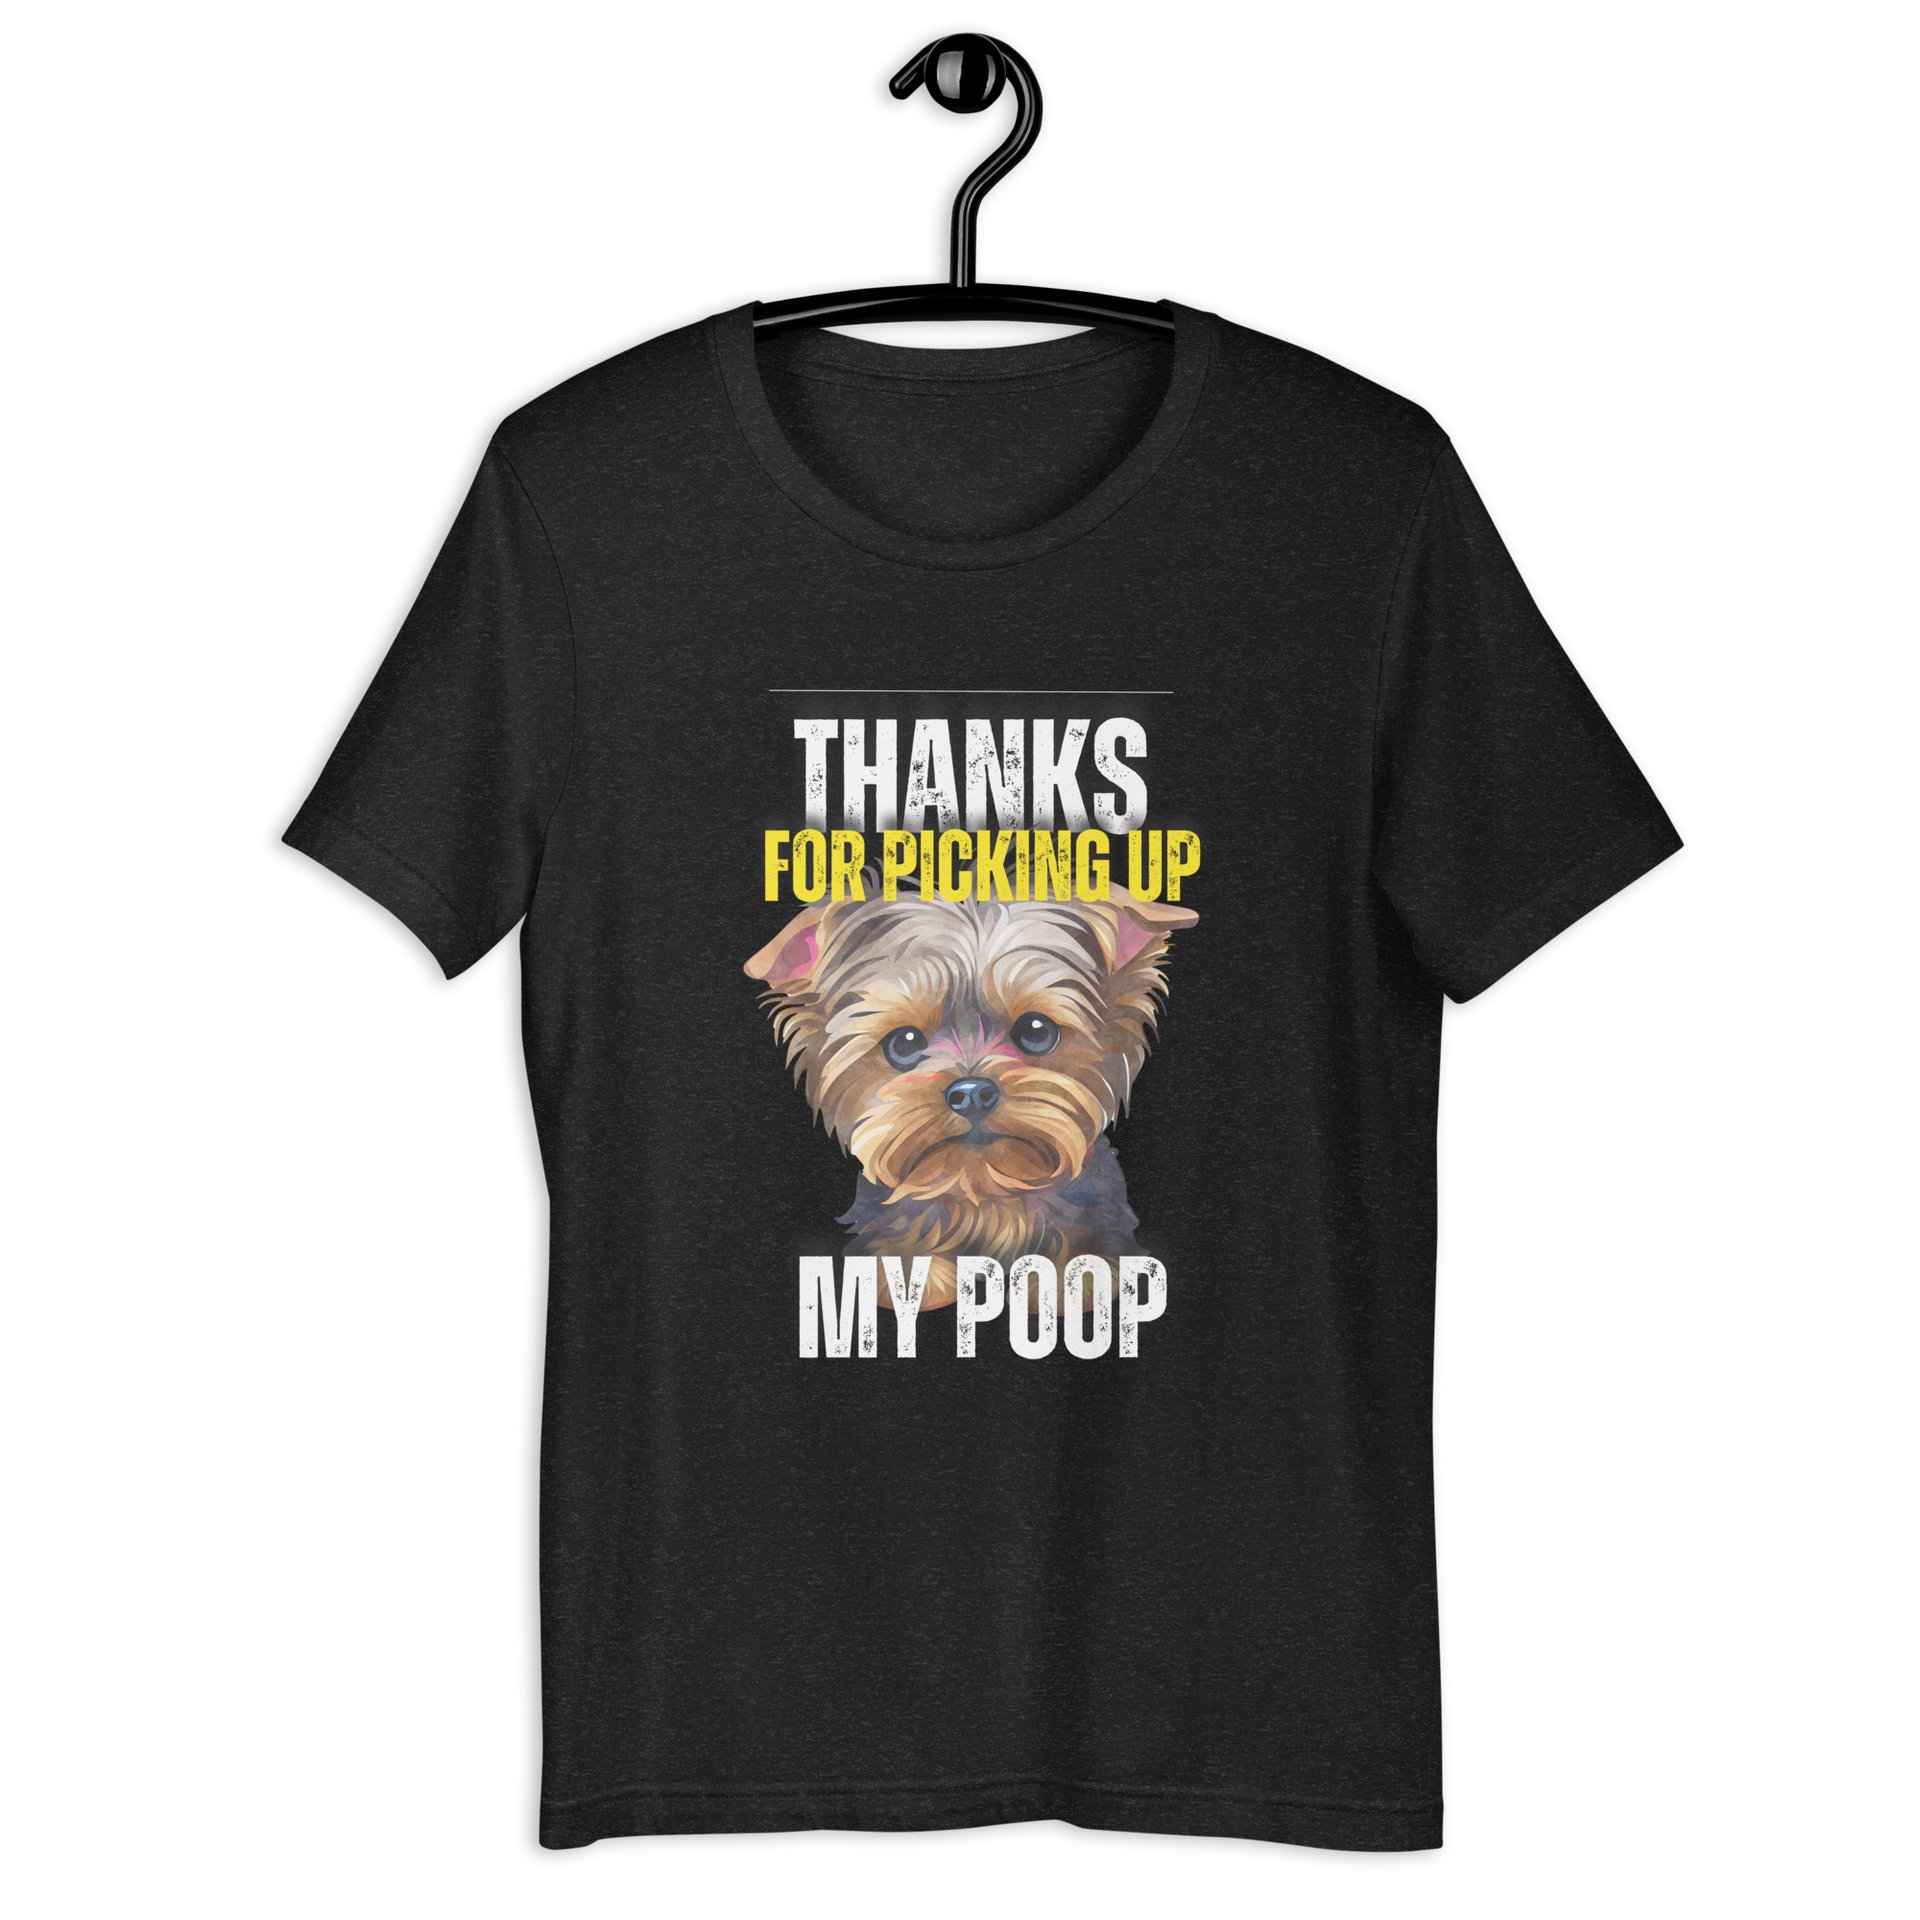 Thanks For Picking Up My POOP Funny Poodles Unisex T-Shirt. Black Heather